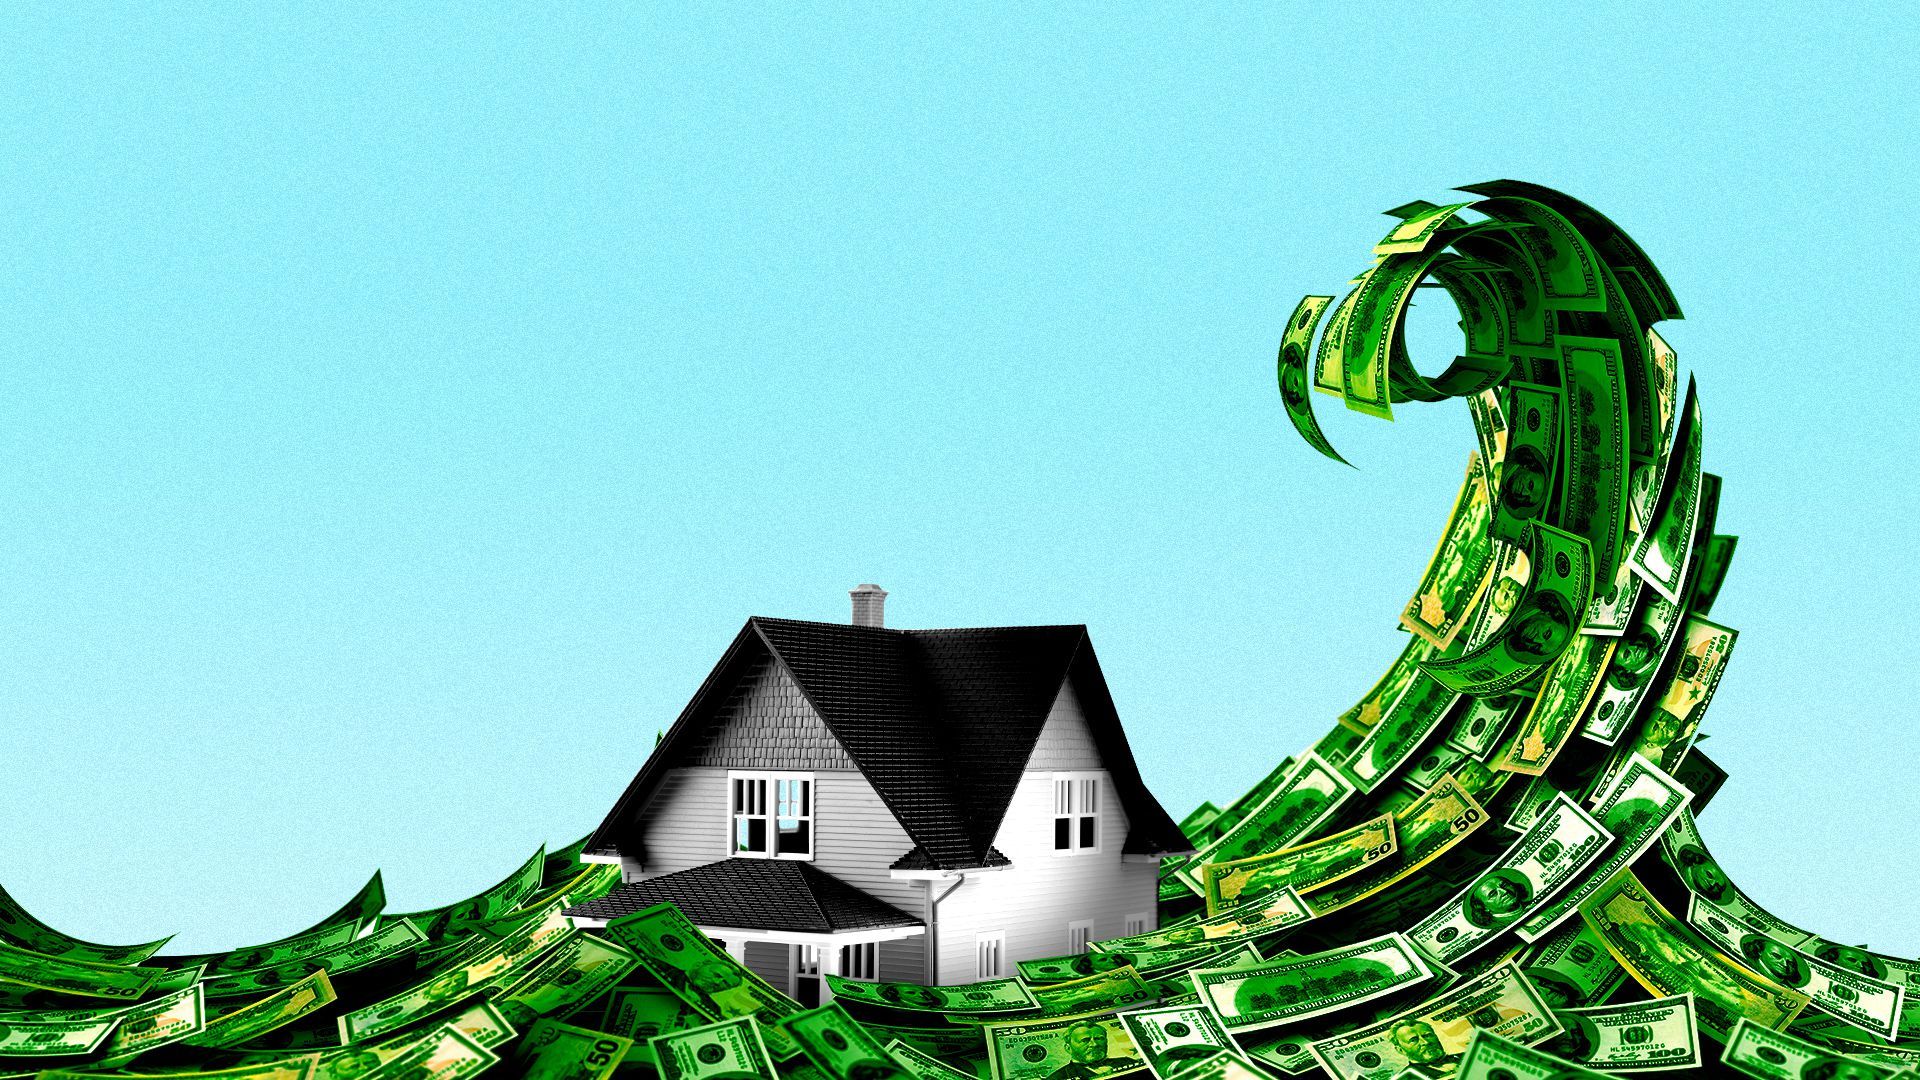 Illustration of a wave of money overtaking a house